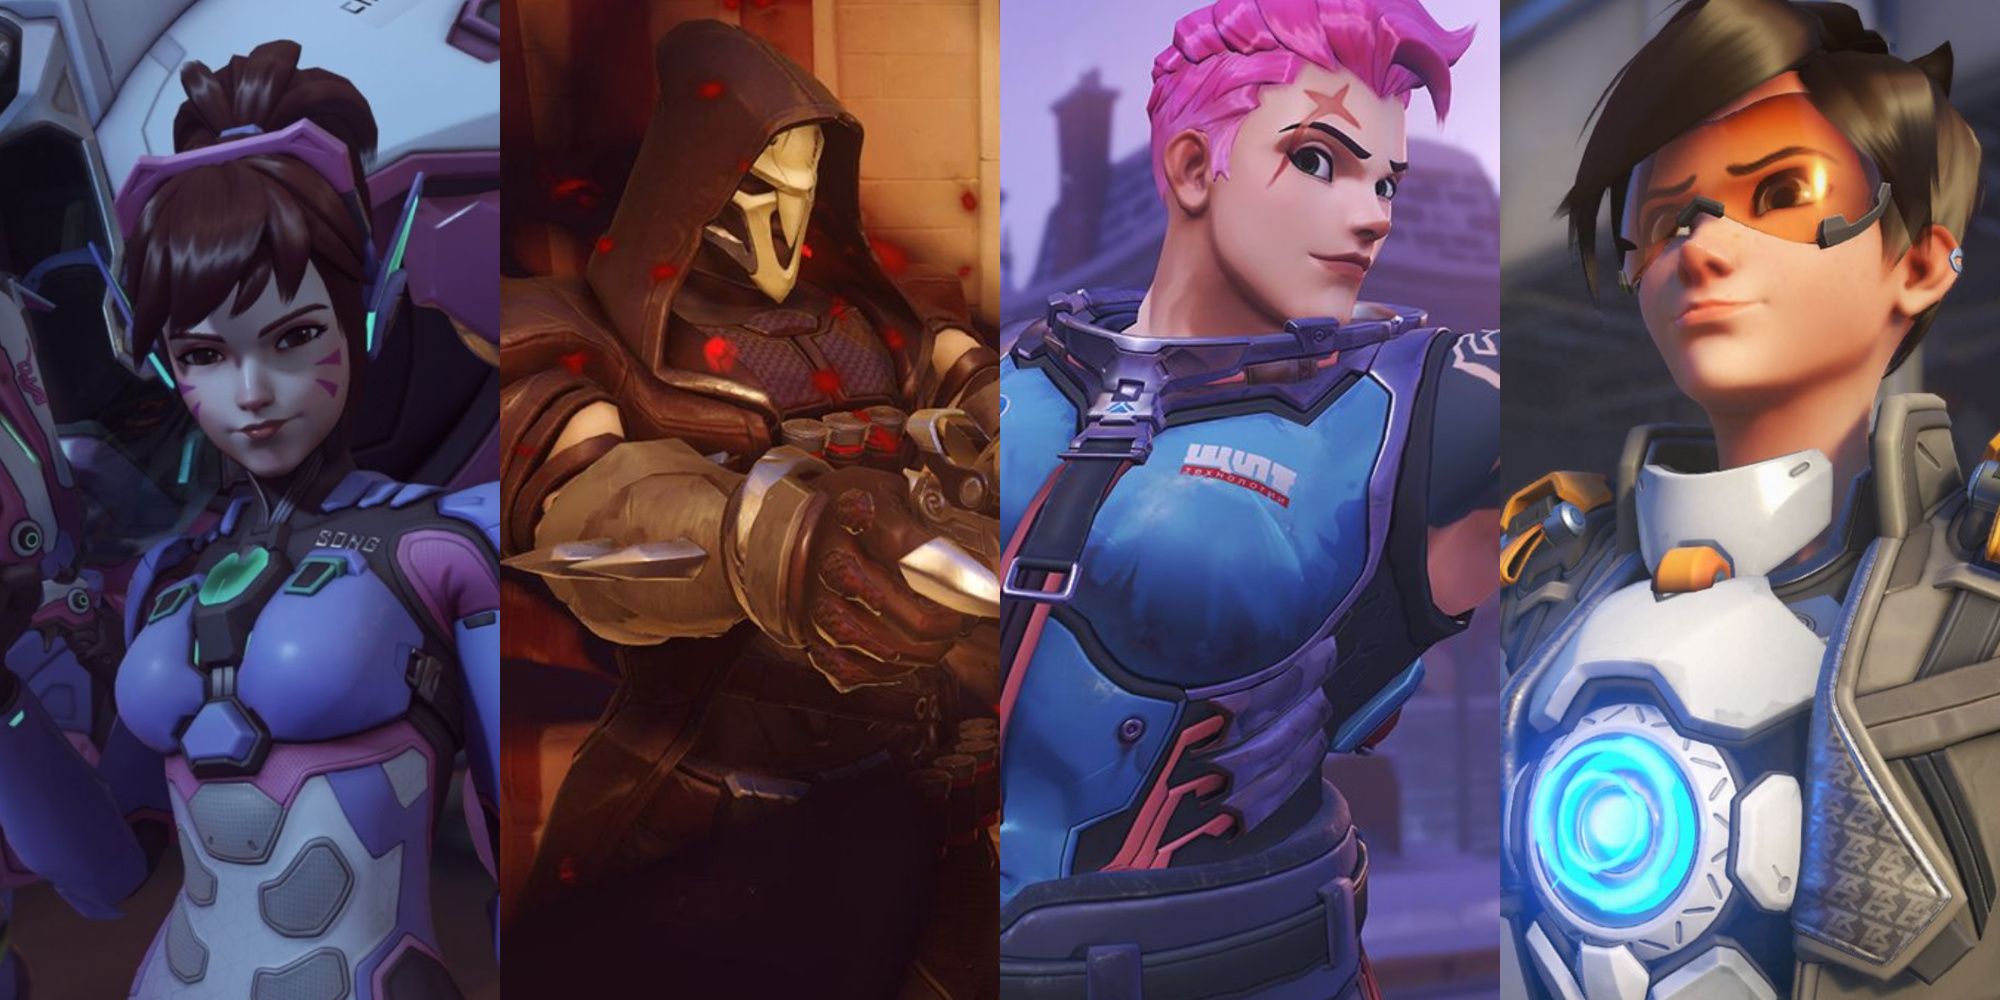 A collage showing D.va, Reaper, Zarya, and Tracer.